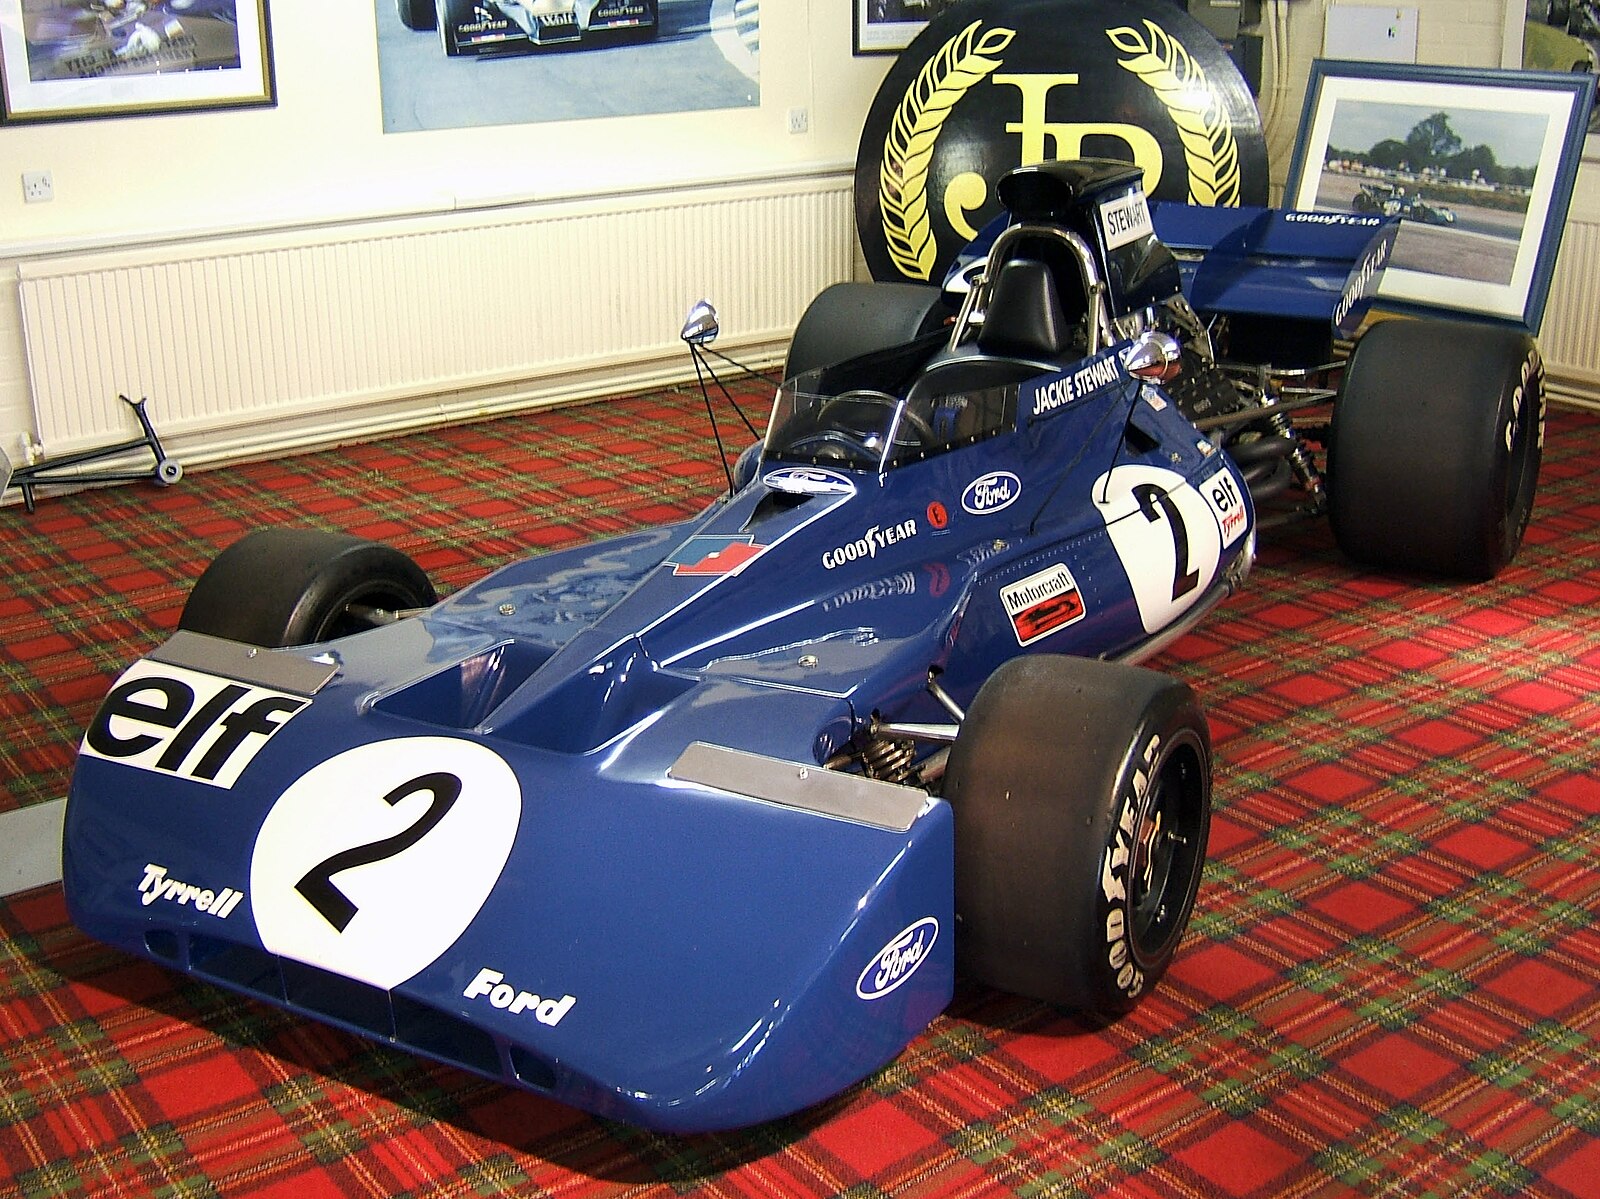 Tyrrell Racing: A Legacy of Innovation and Tenacity in Formula 1